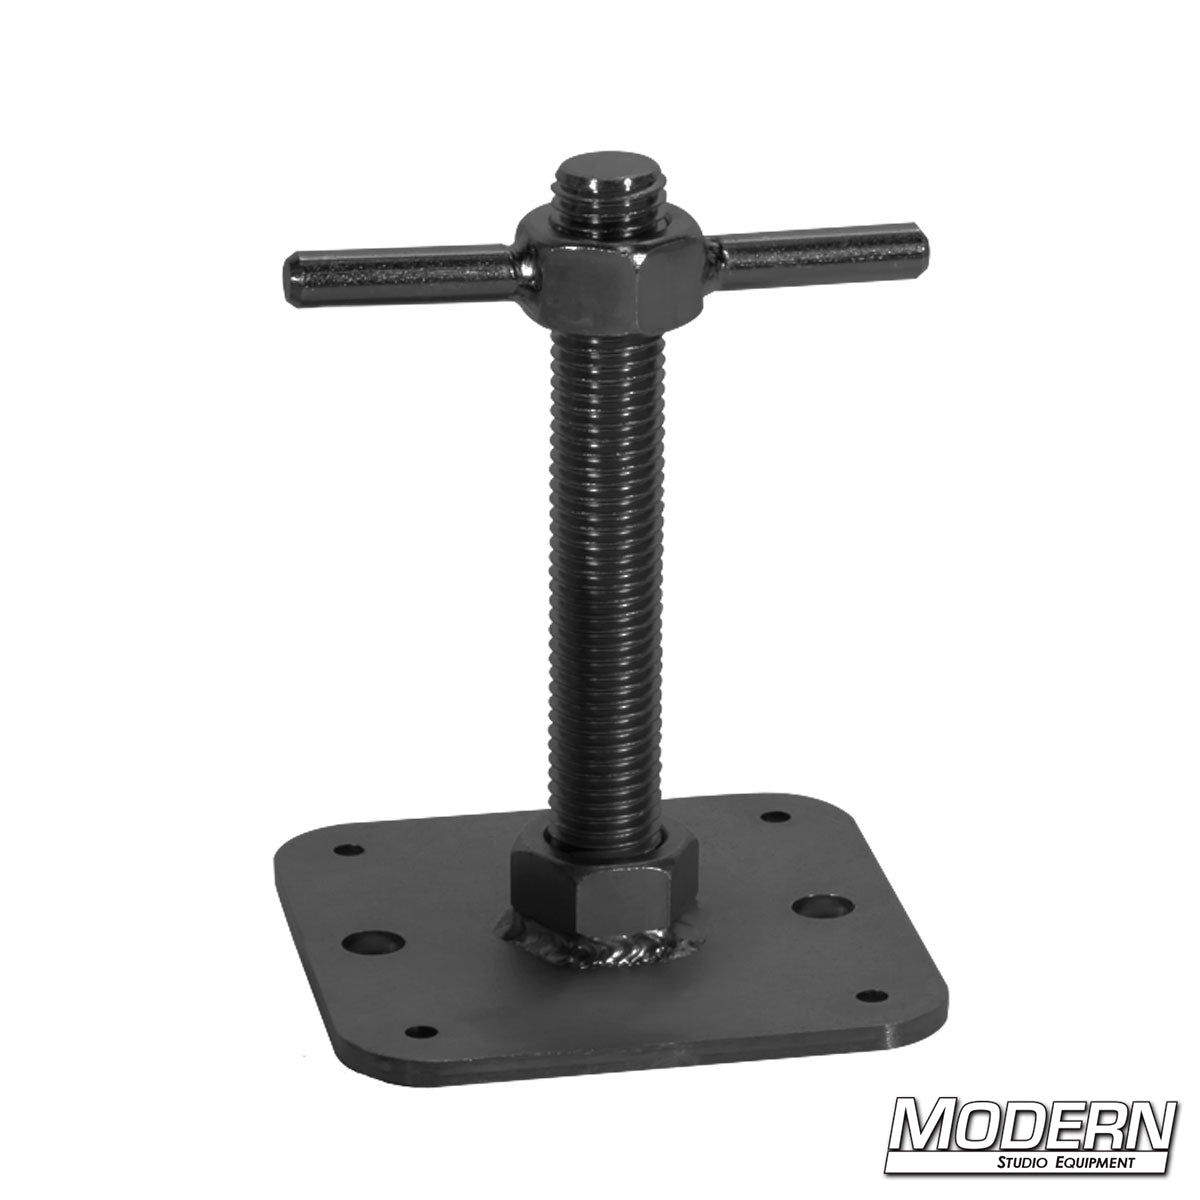 Screw Jack for Speed-Rail® Wall Spreader (1-1/4" & 1-1/2")